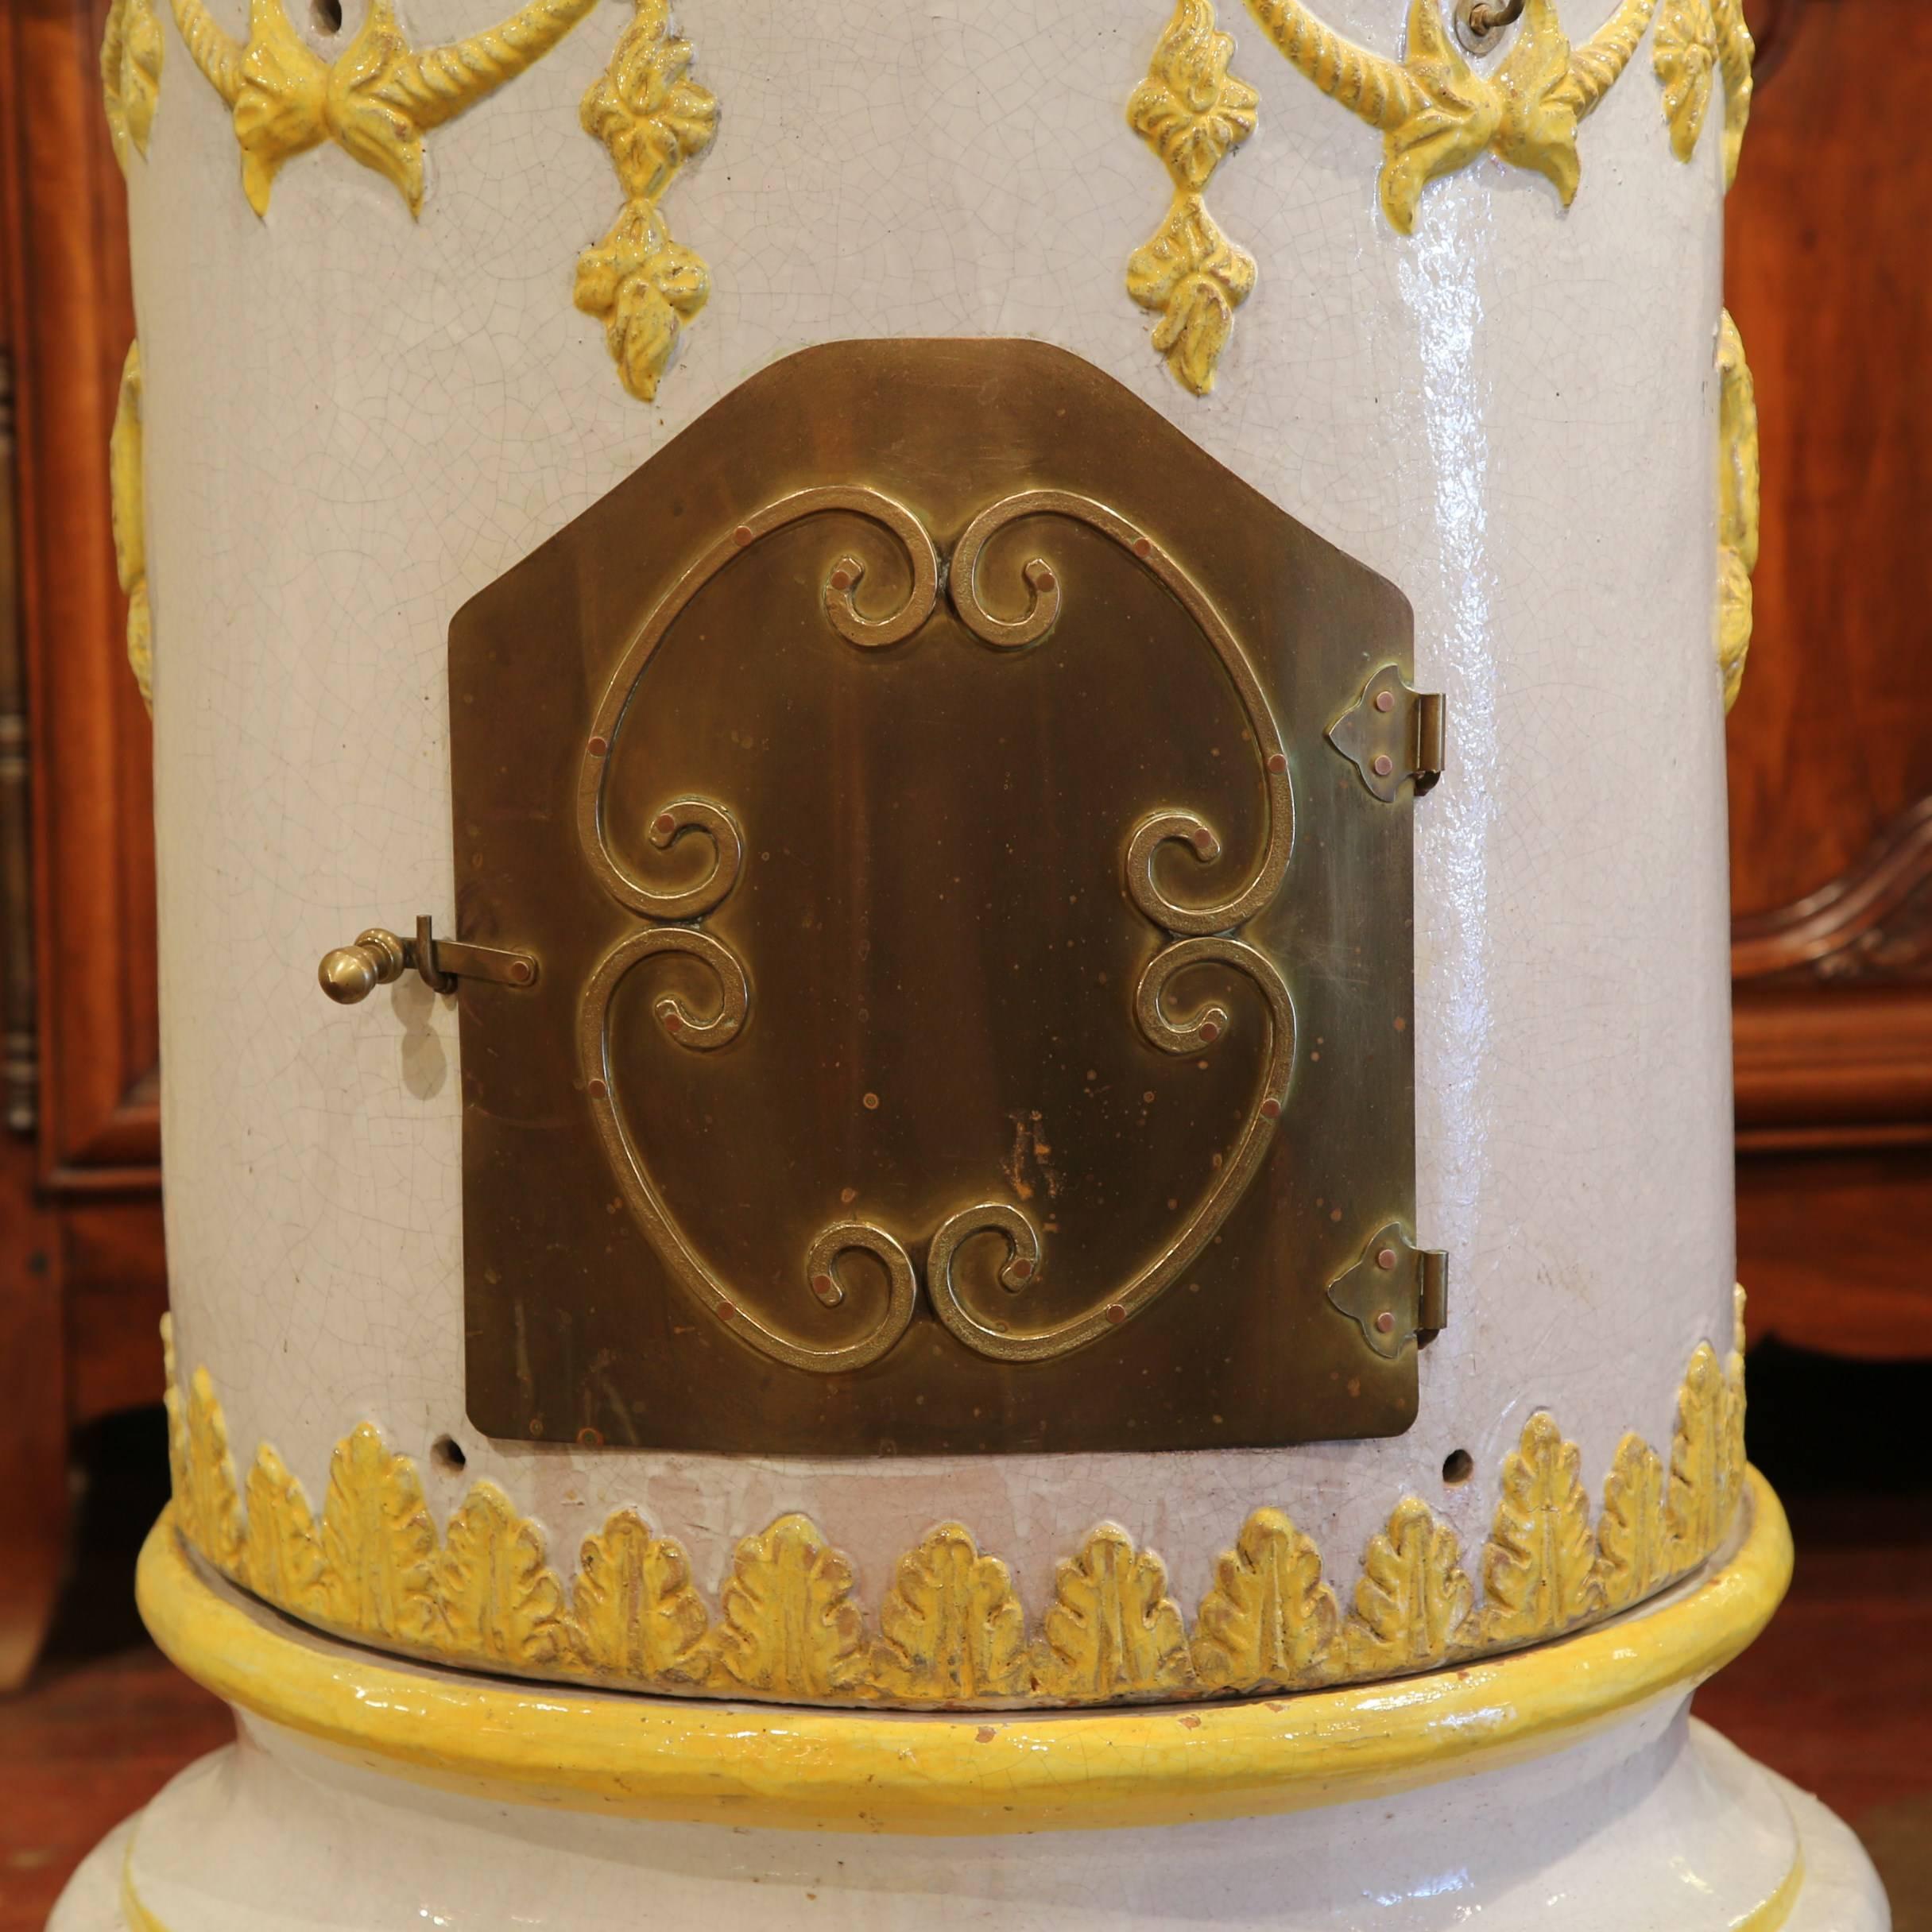 This tall, antique stove was created in Lyon, France, circa 1870. Sited on four bun feet and made in three separate sections, this colorful ceramic piece has a small brass door at the bottom to collect ashes, and a centre door to feed coal or wood